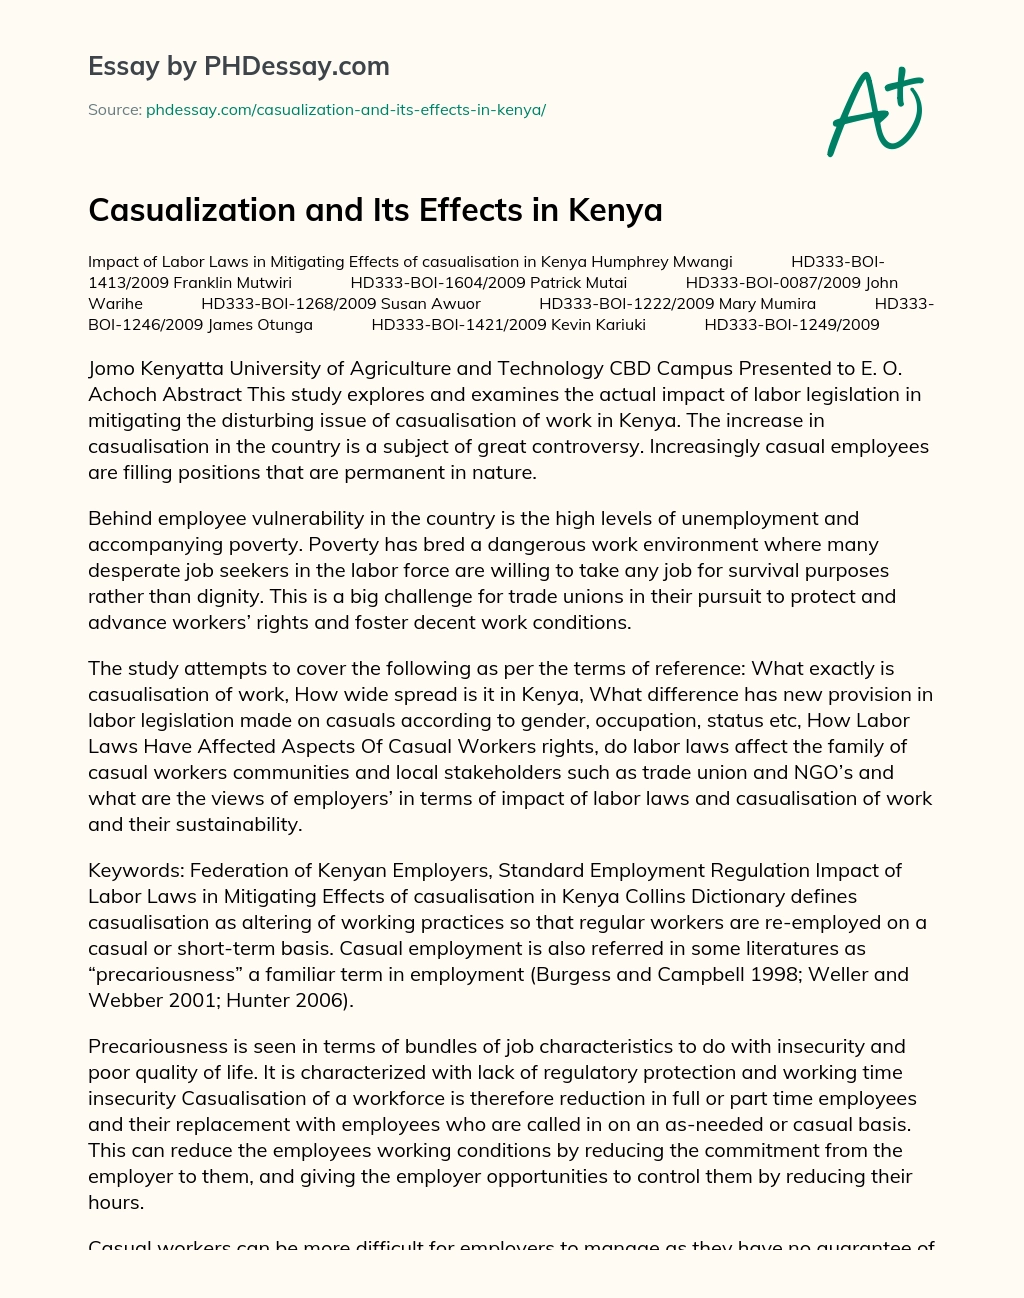 Casualization and Its Effects in Kenya essay